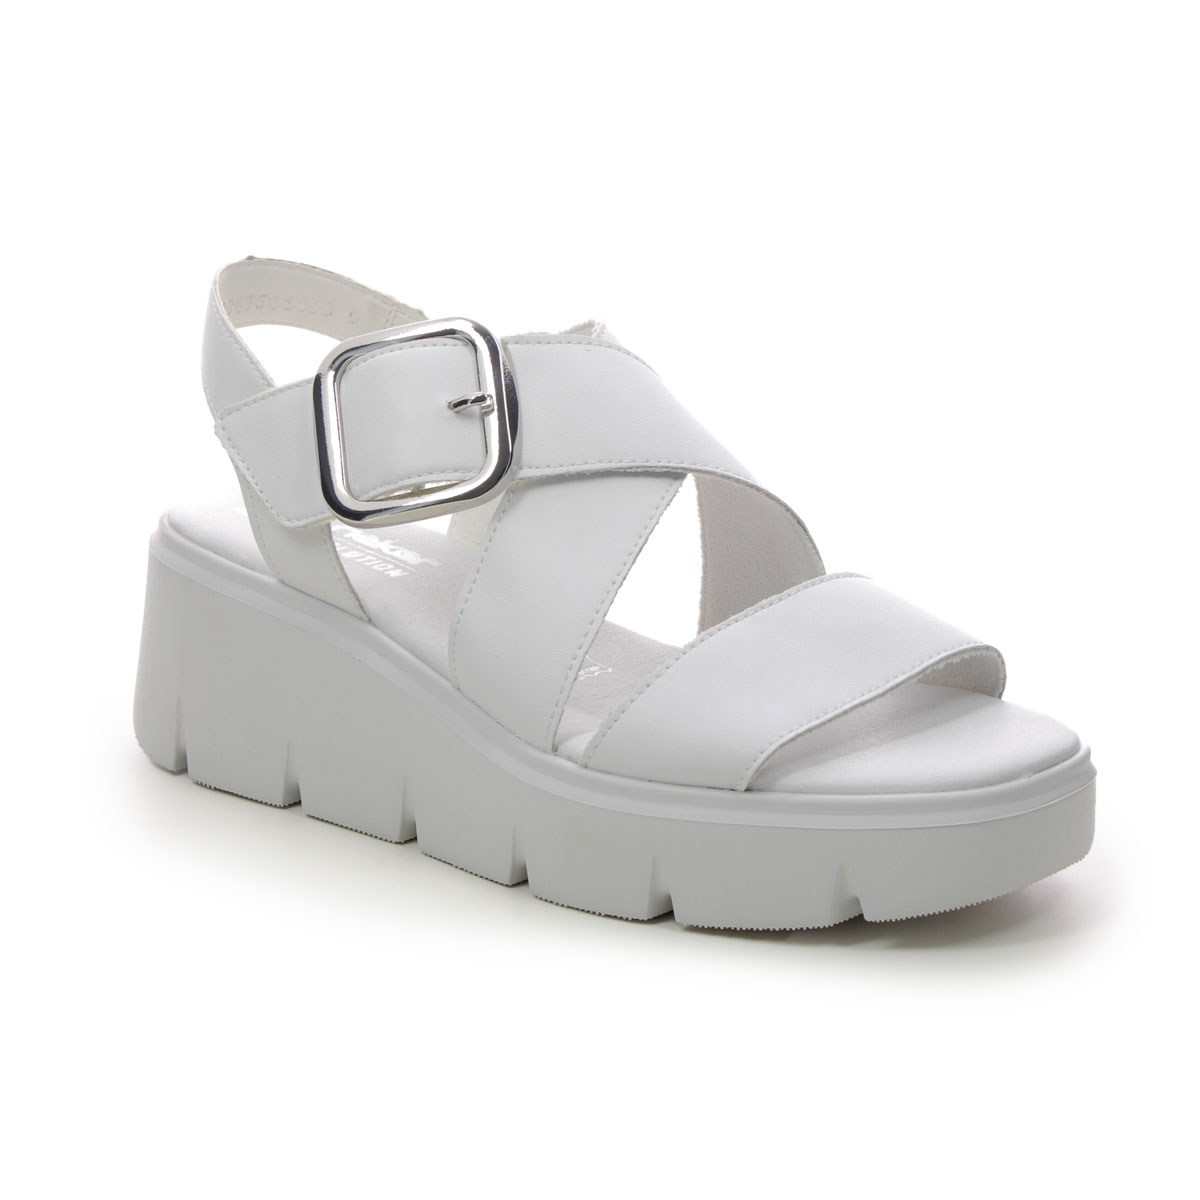 Rieker W1550-80 WHITE LEATHER Womens Wedge Sandals in a Plain Leather in Size 42